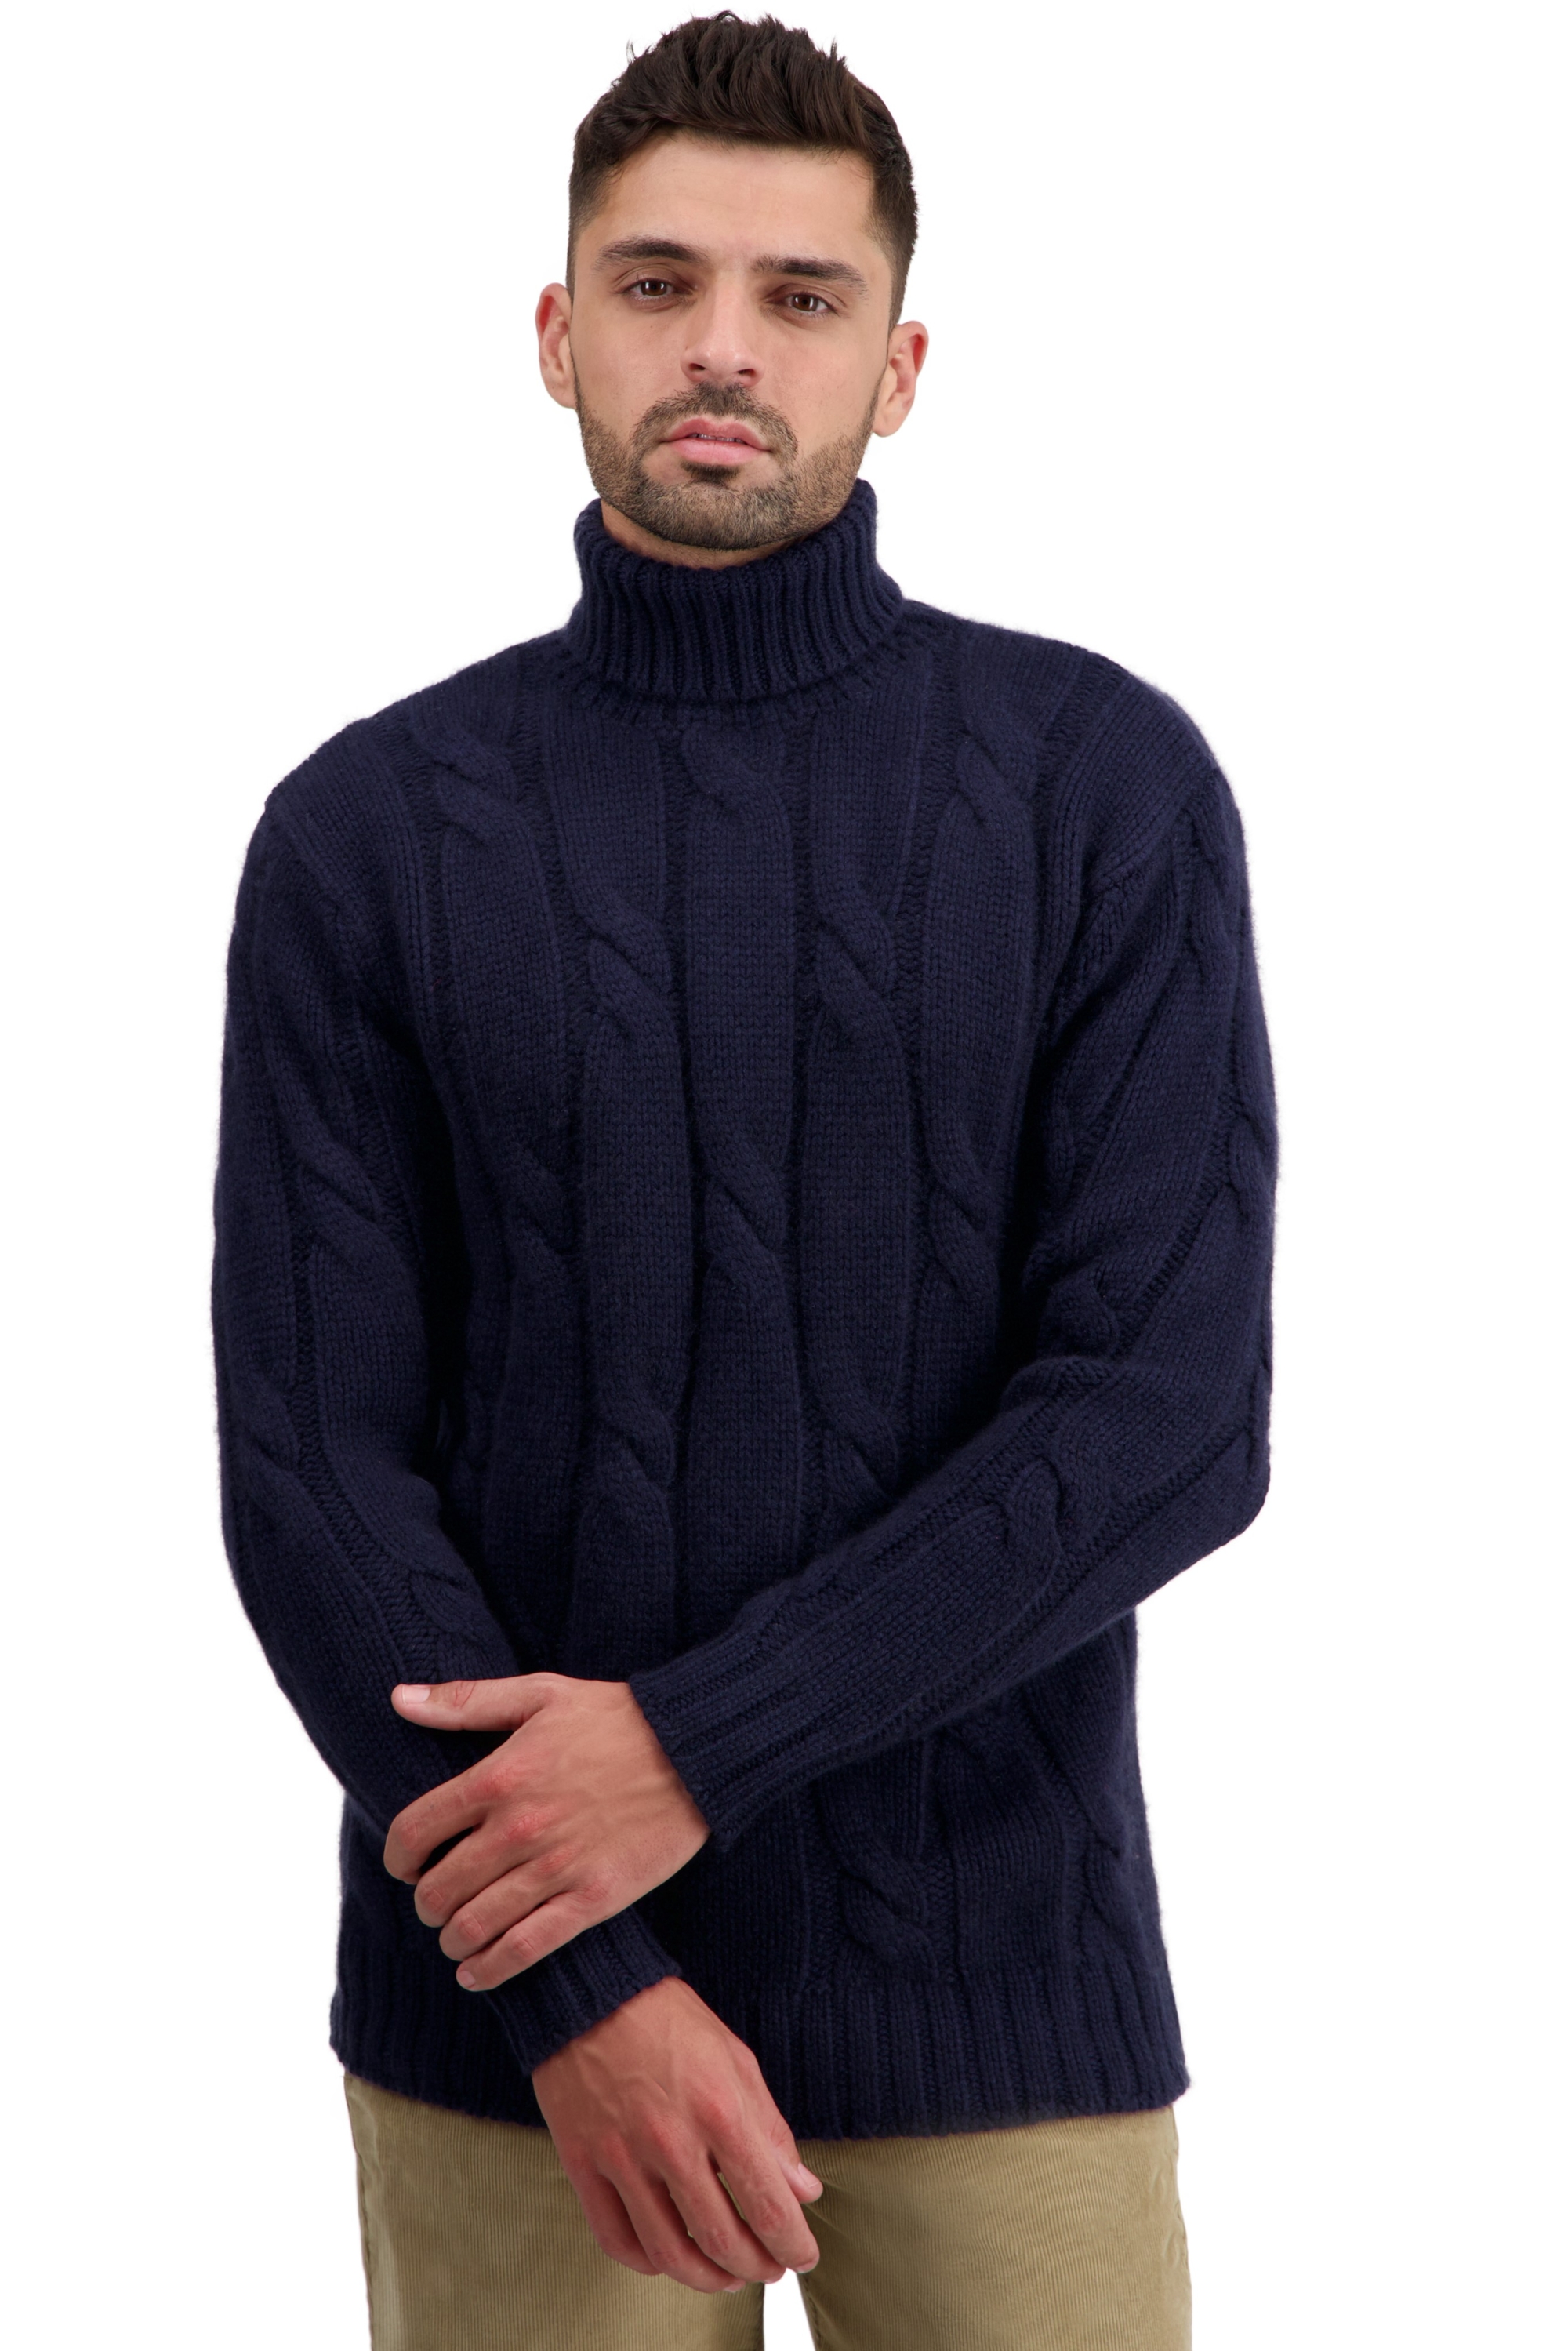 Cachemire pull homme triton marine fonce xs